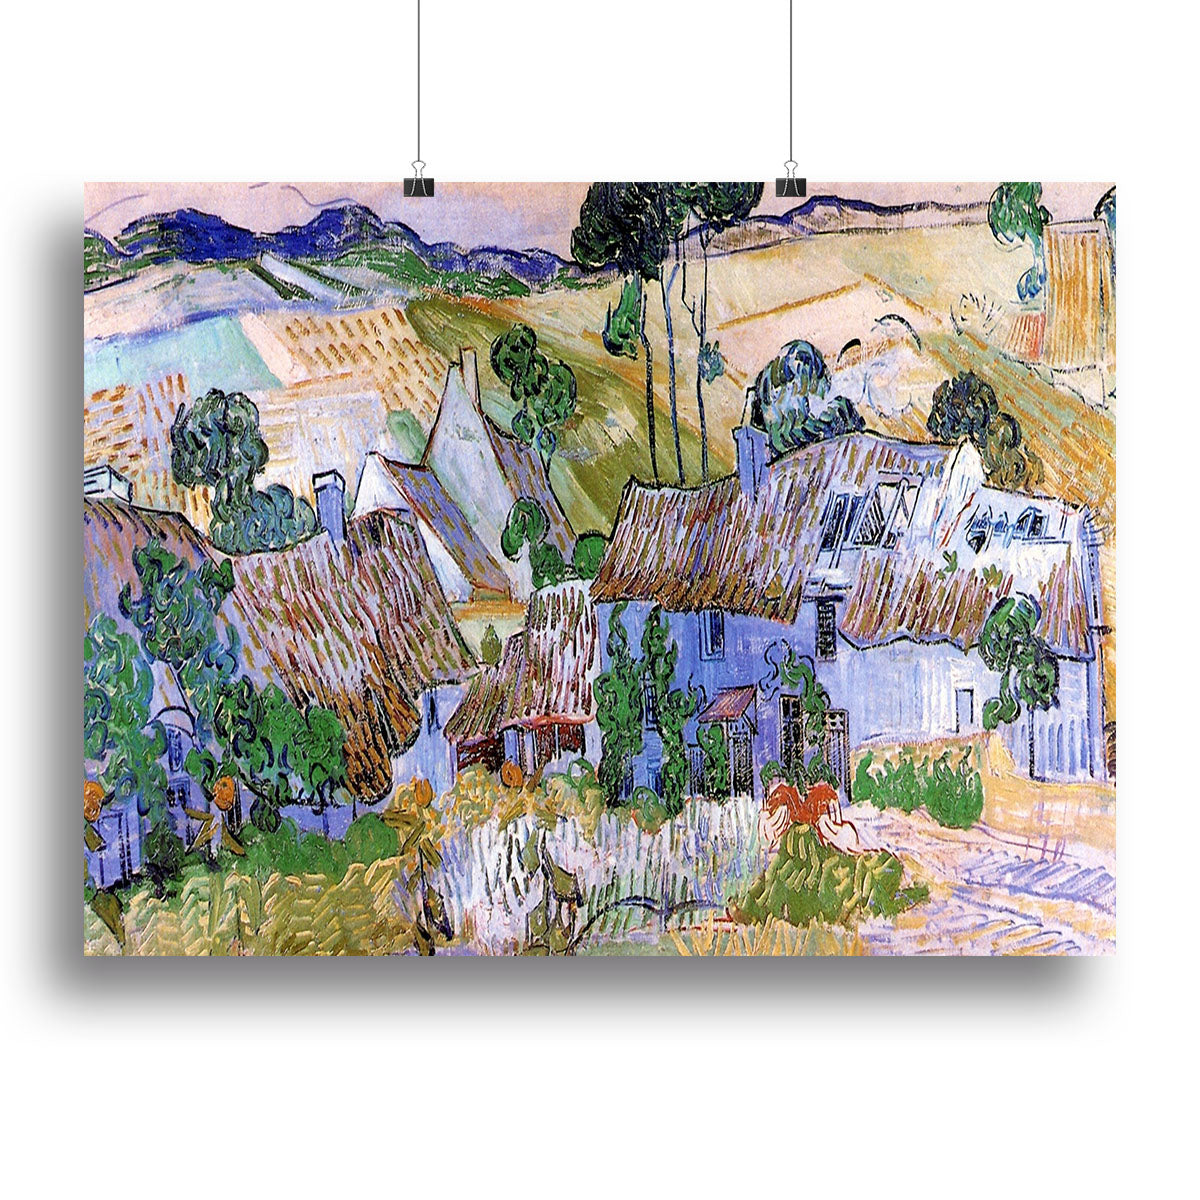 Thatched Cottages by a Hill by Van Gogh Canvas Print or Poster - Canvas Art Rocks - 2